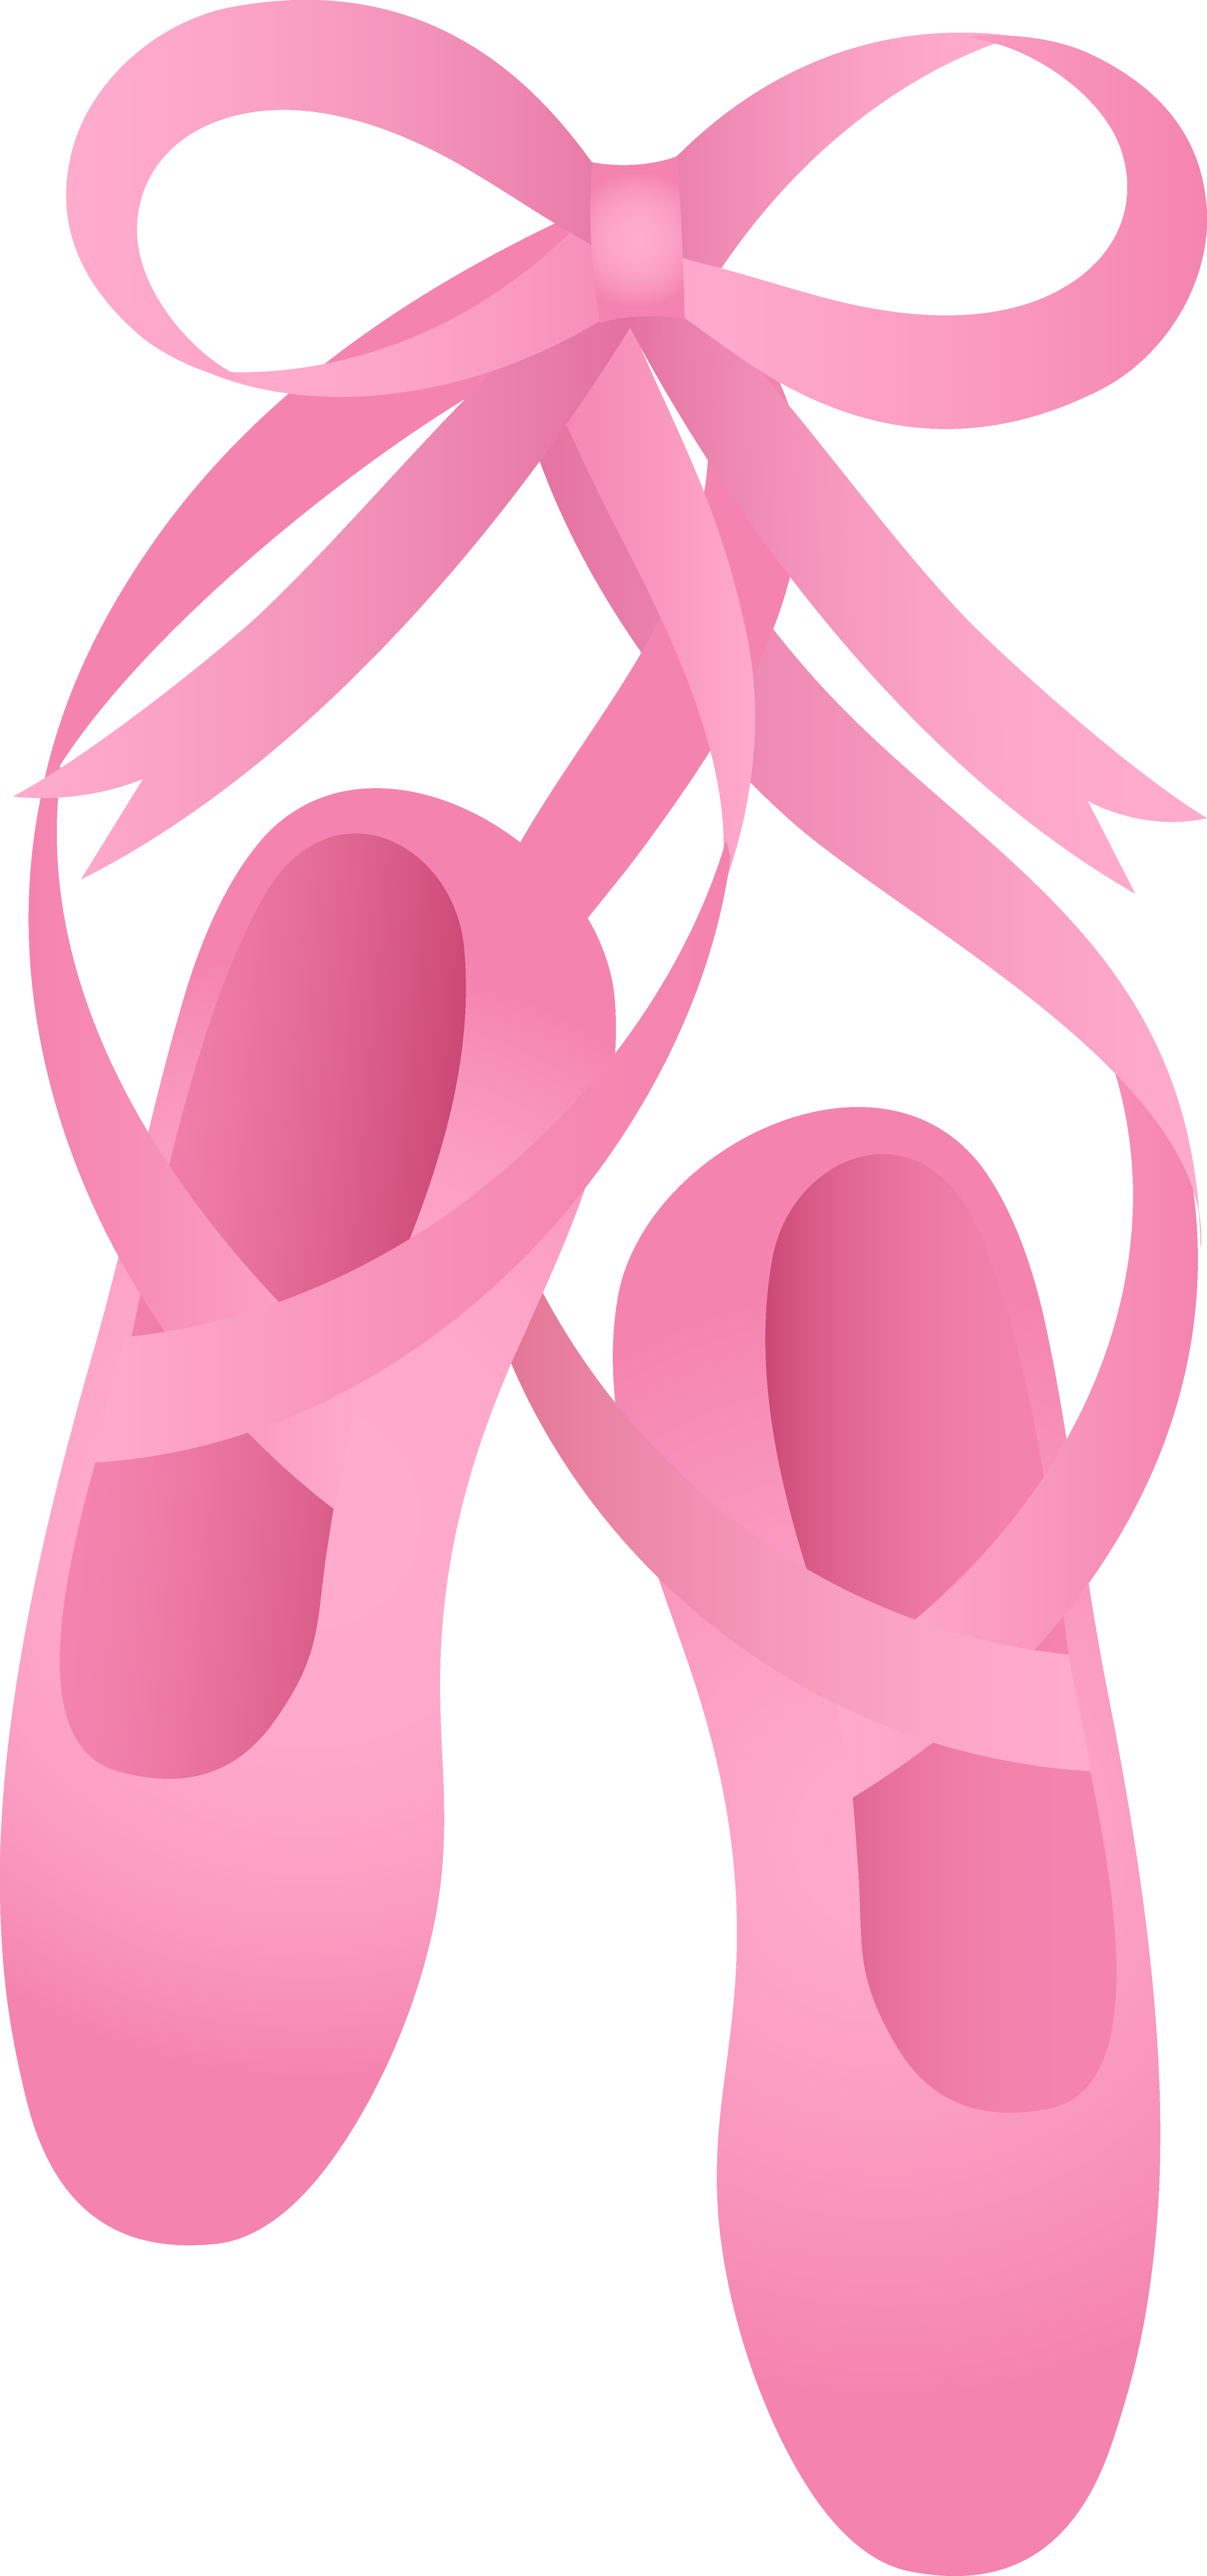 Dancer clipart baby. Pink ballet slippers shoes